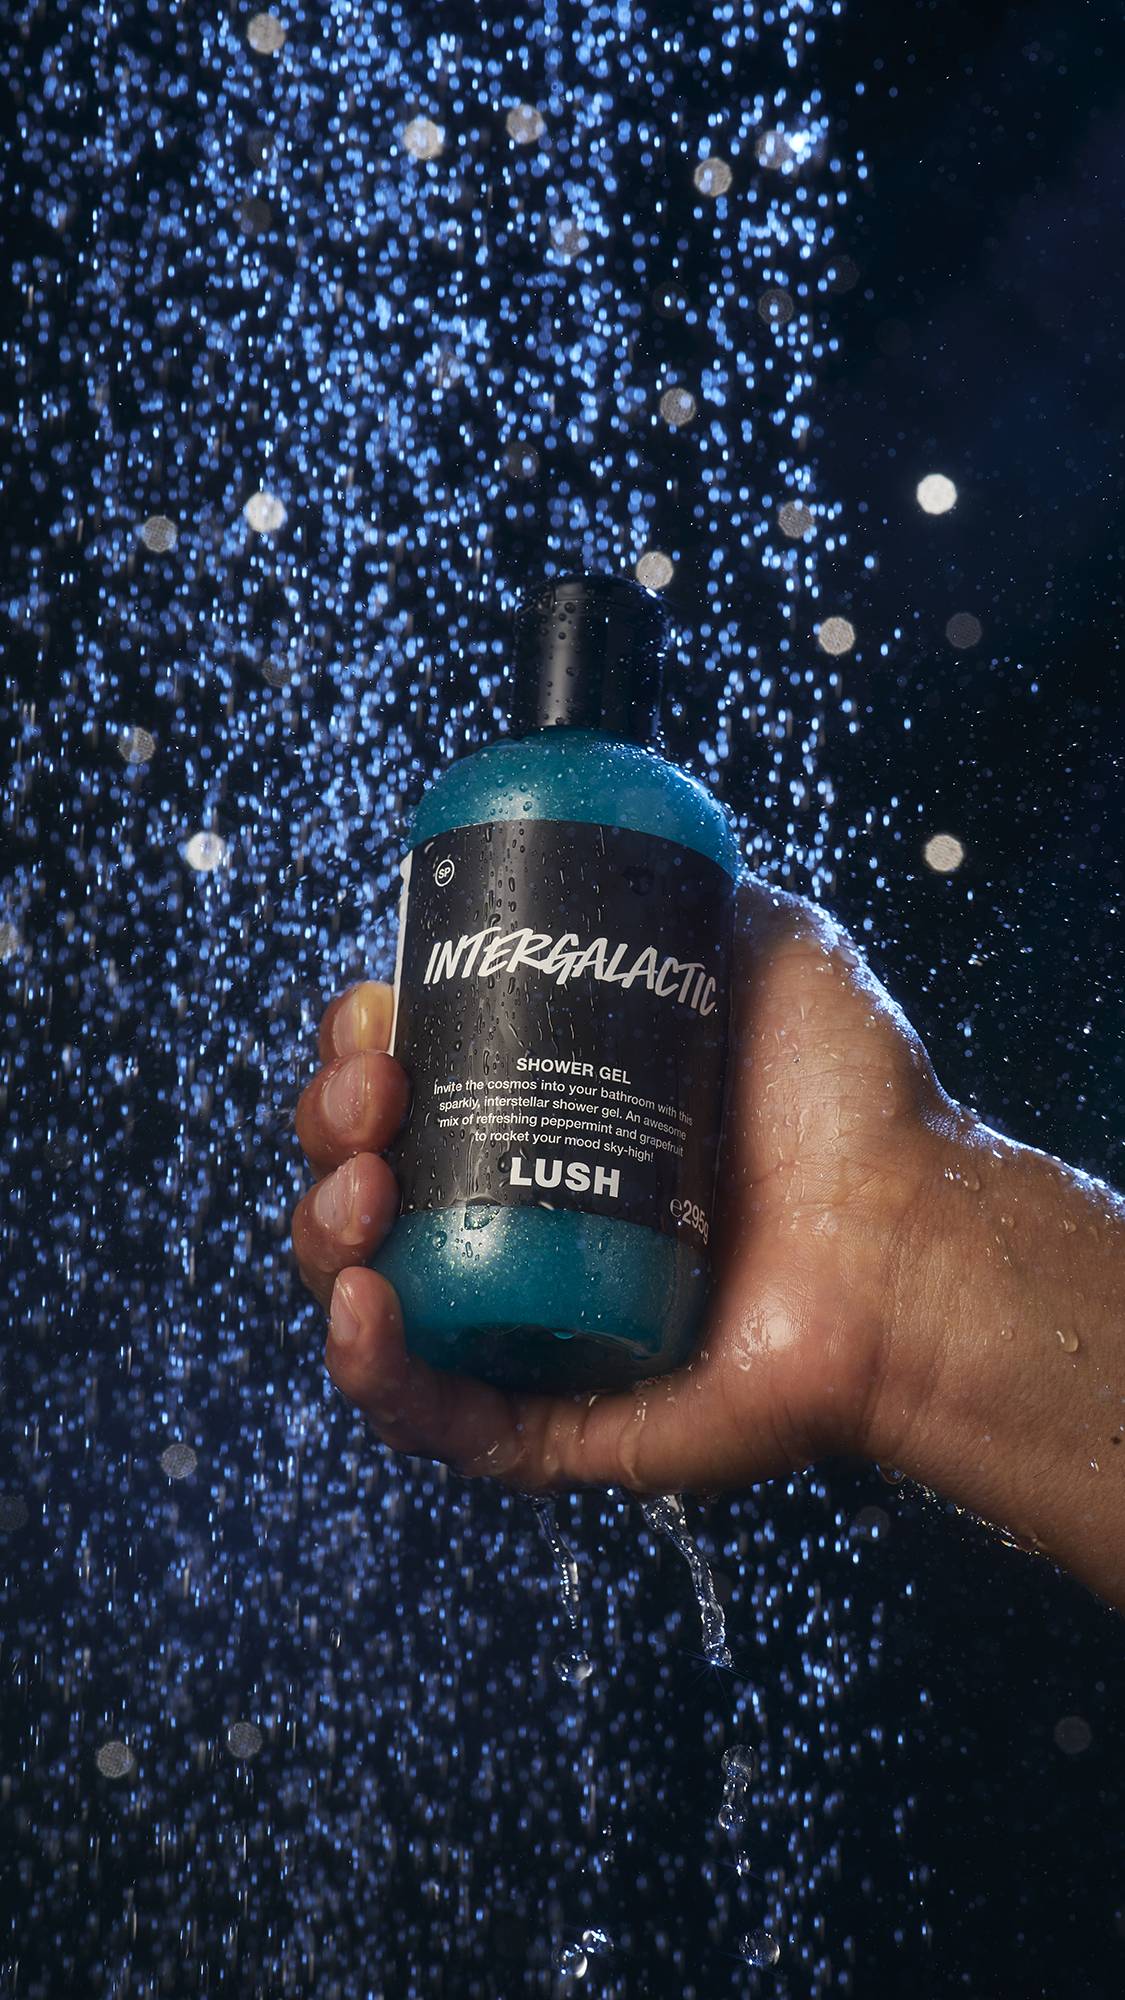 Image shows a close-up of the model's hand holding the Intergalactic shower gel bottle under blue-tinted shower water. 